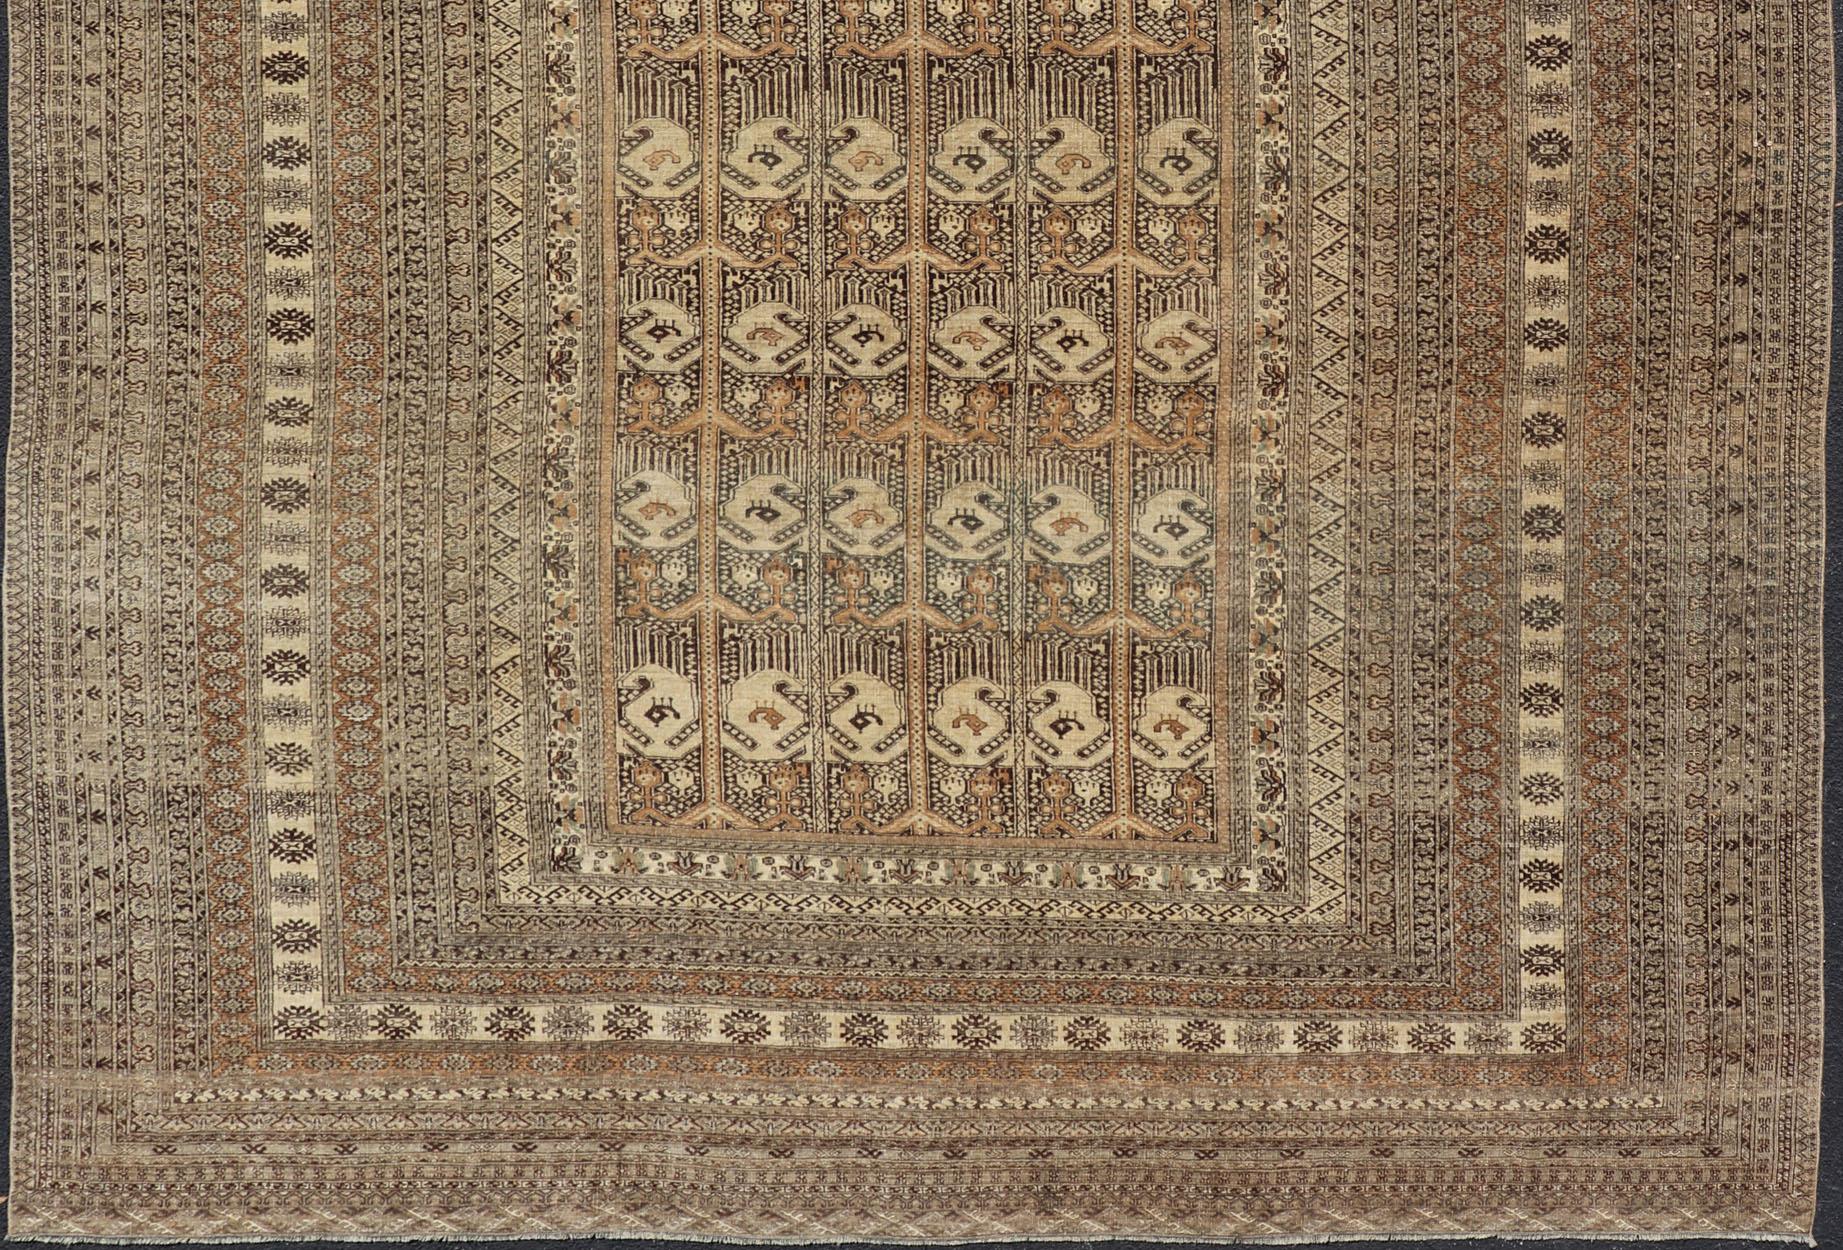 This Ersari rug has been hand-knotted in the finest wool. The rug features a repeating derivative of a tribal beluch design throughout the entirety of the rug, enclosed within a complementary, multi-tiered border, depicting small repeating tribal